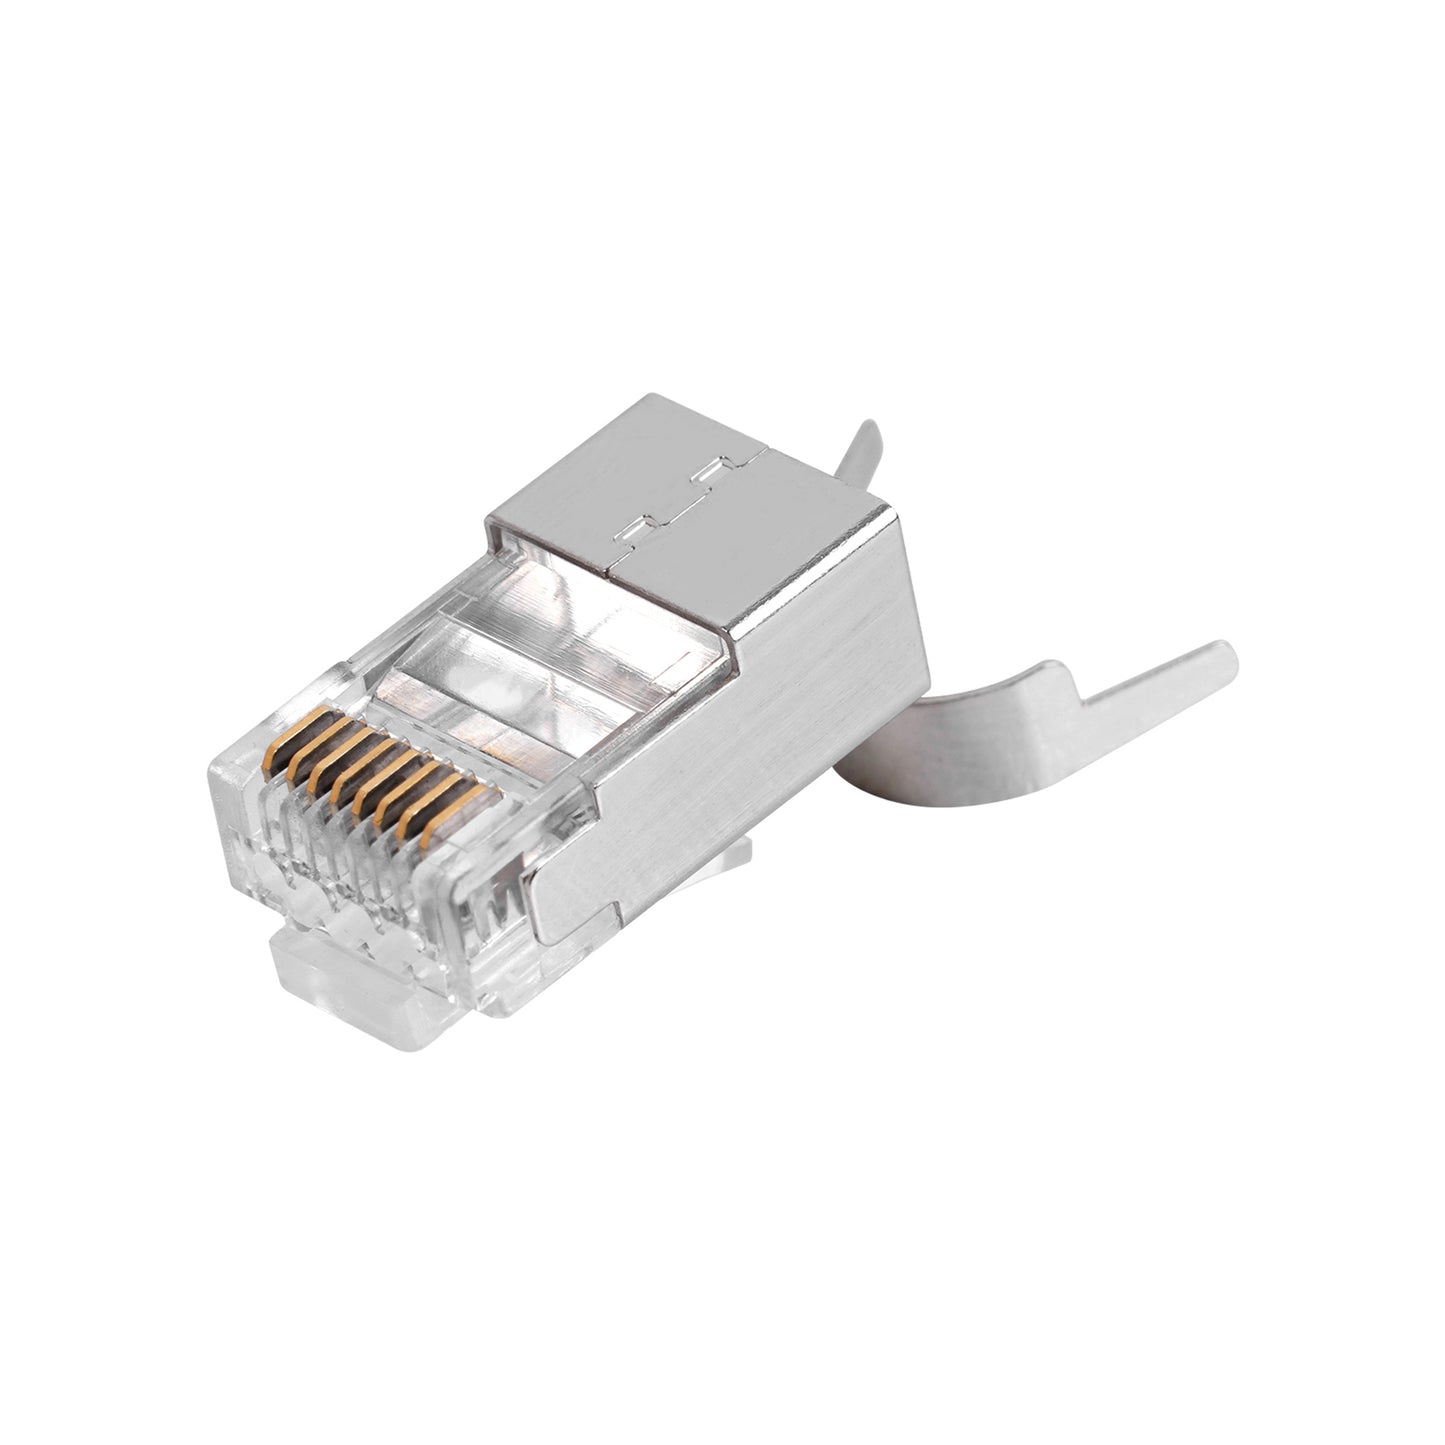 RJ45 Shielded Category 6A Connector